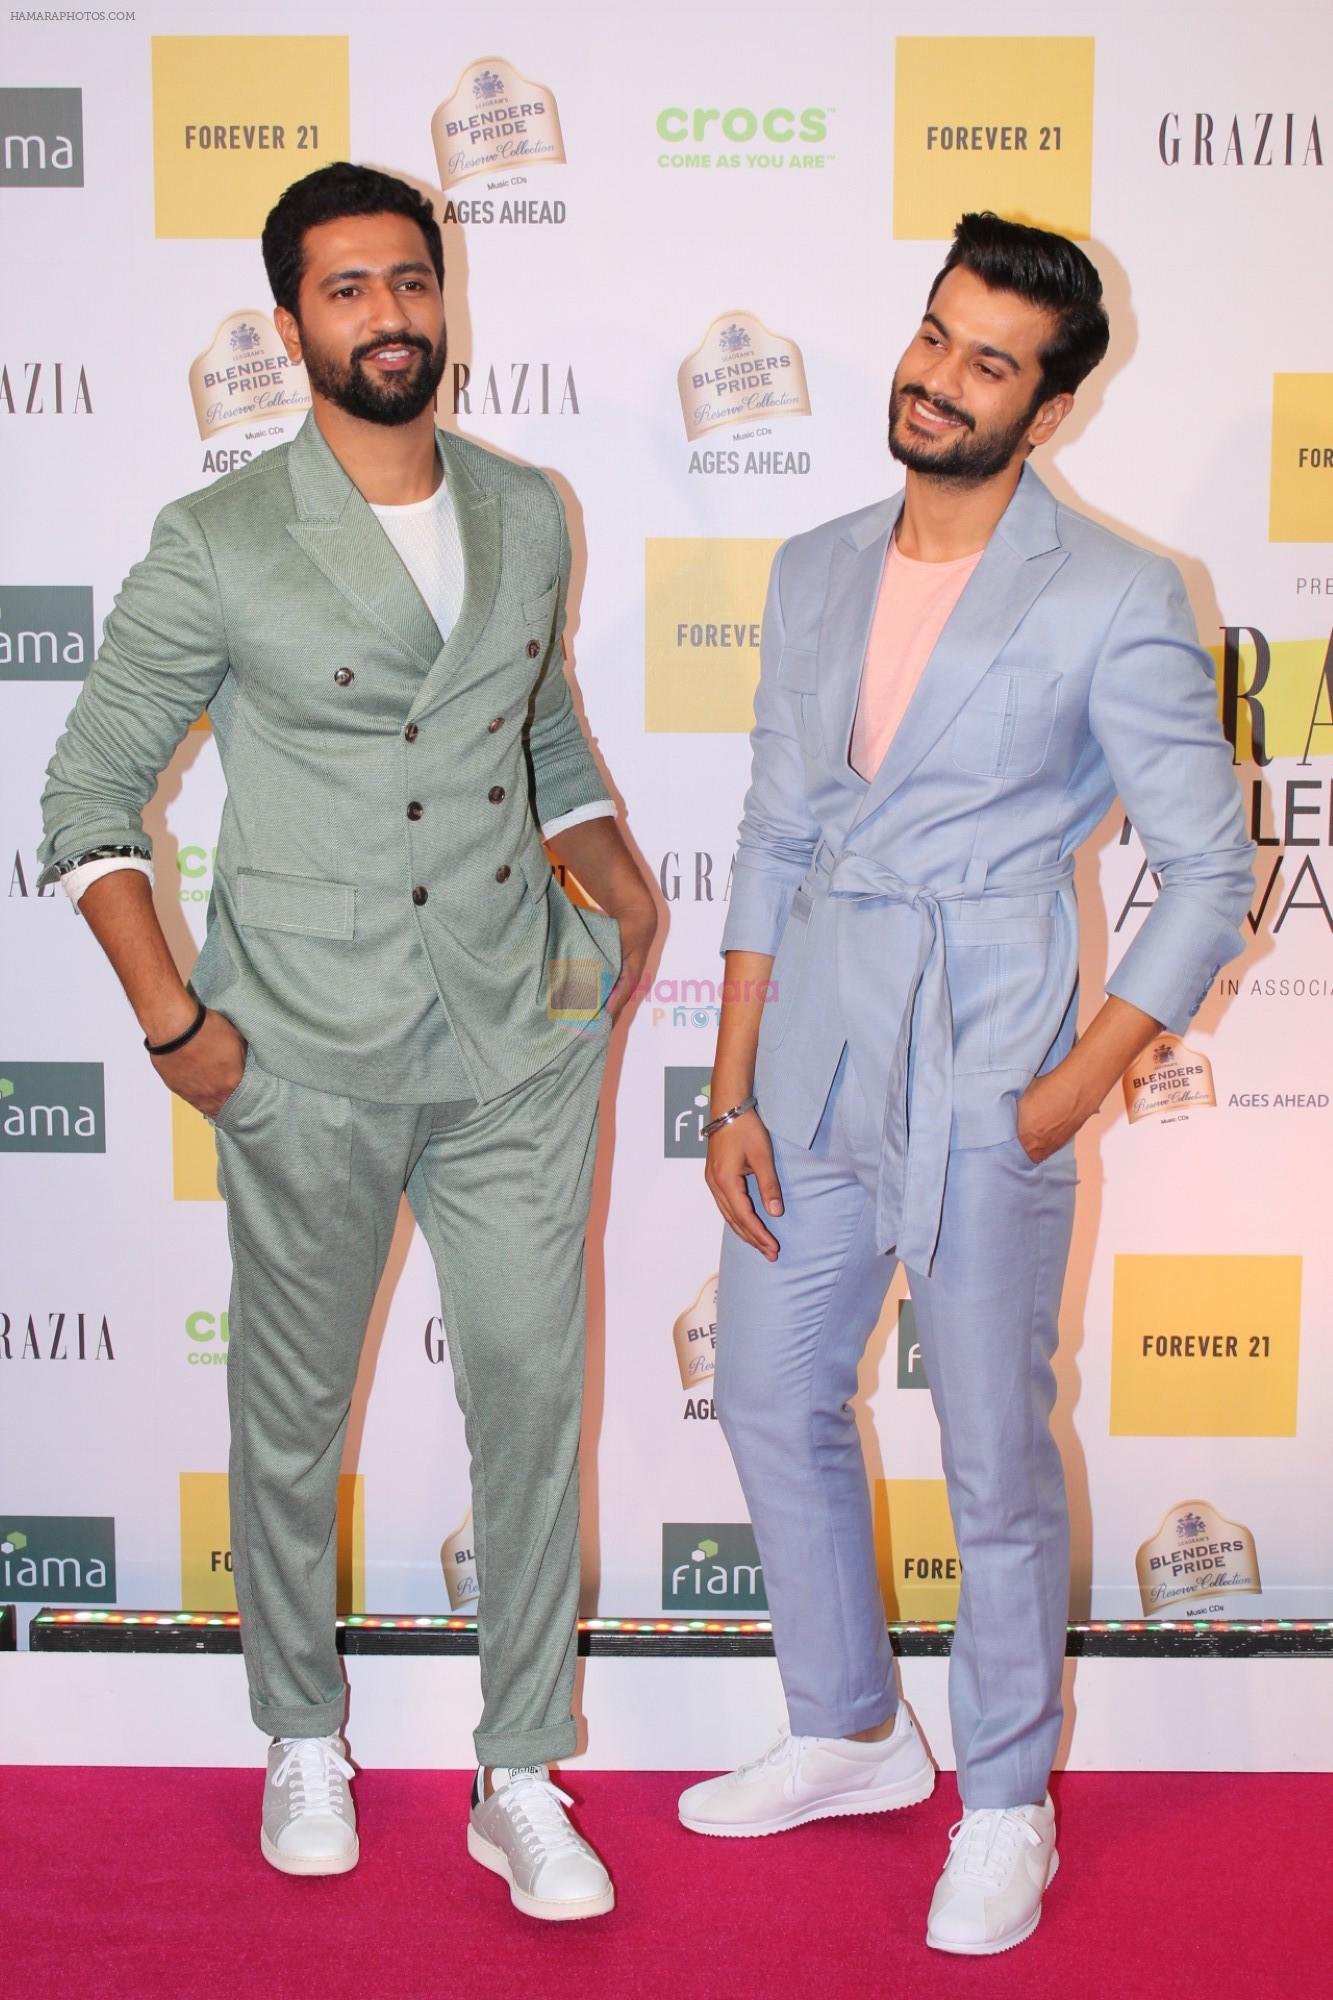 Vicky Kaushal, Sunny Kaushal at the Red Carpet of 1st Edition of Grazia Millennial Awards on 19th June 2019 on 19th June 2019